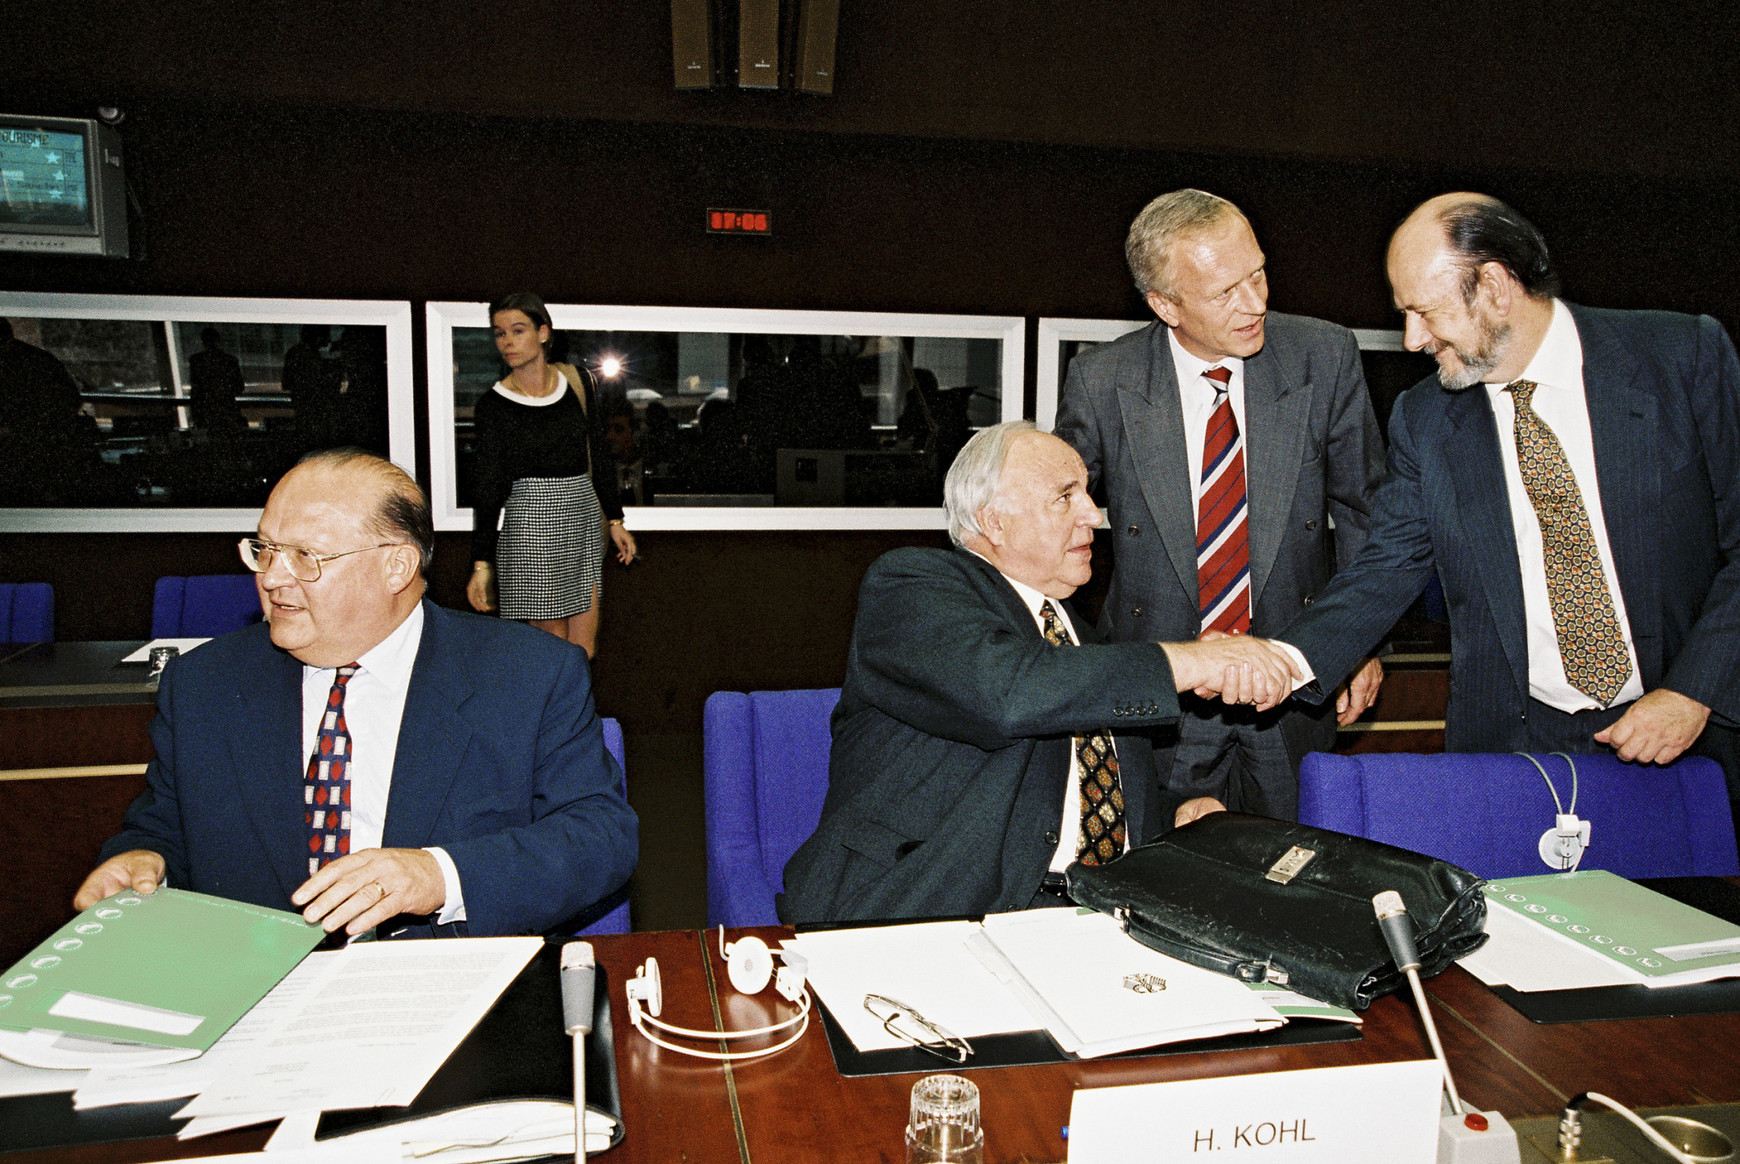 © Communautés Européennes 1997- EP /Meeting restricted summit of EPP heads of state and government Ukraine, retour aux années 90